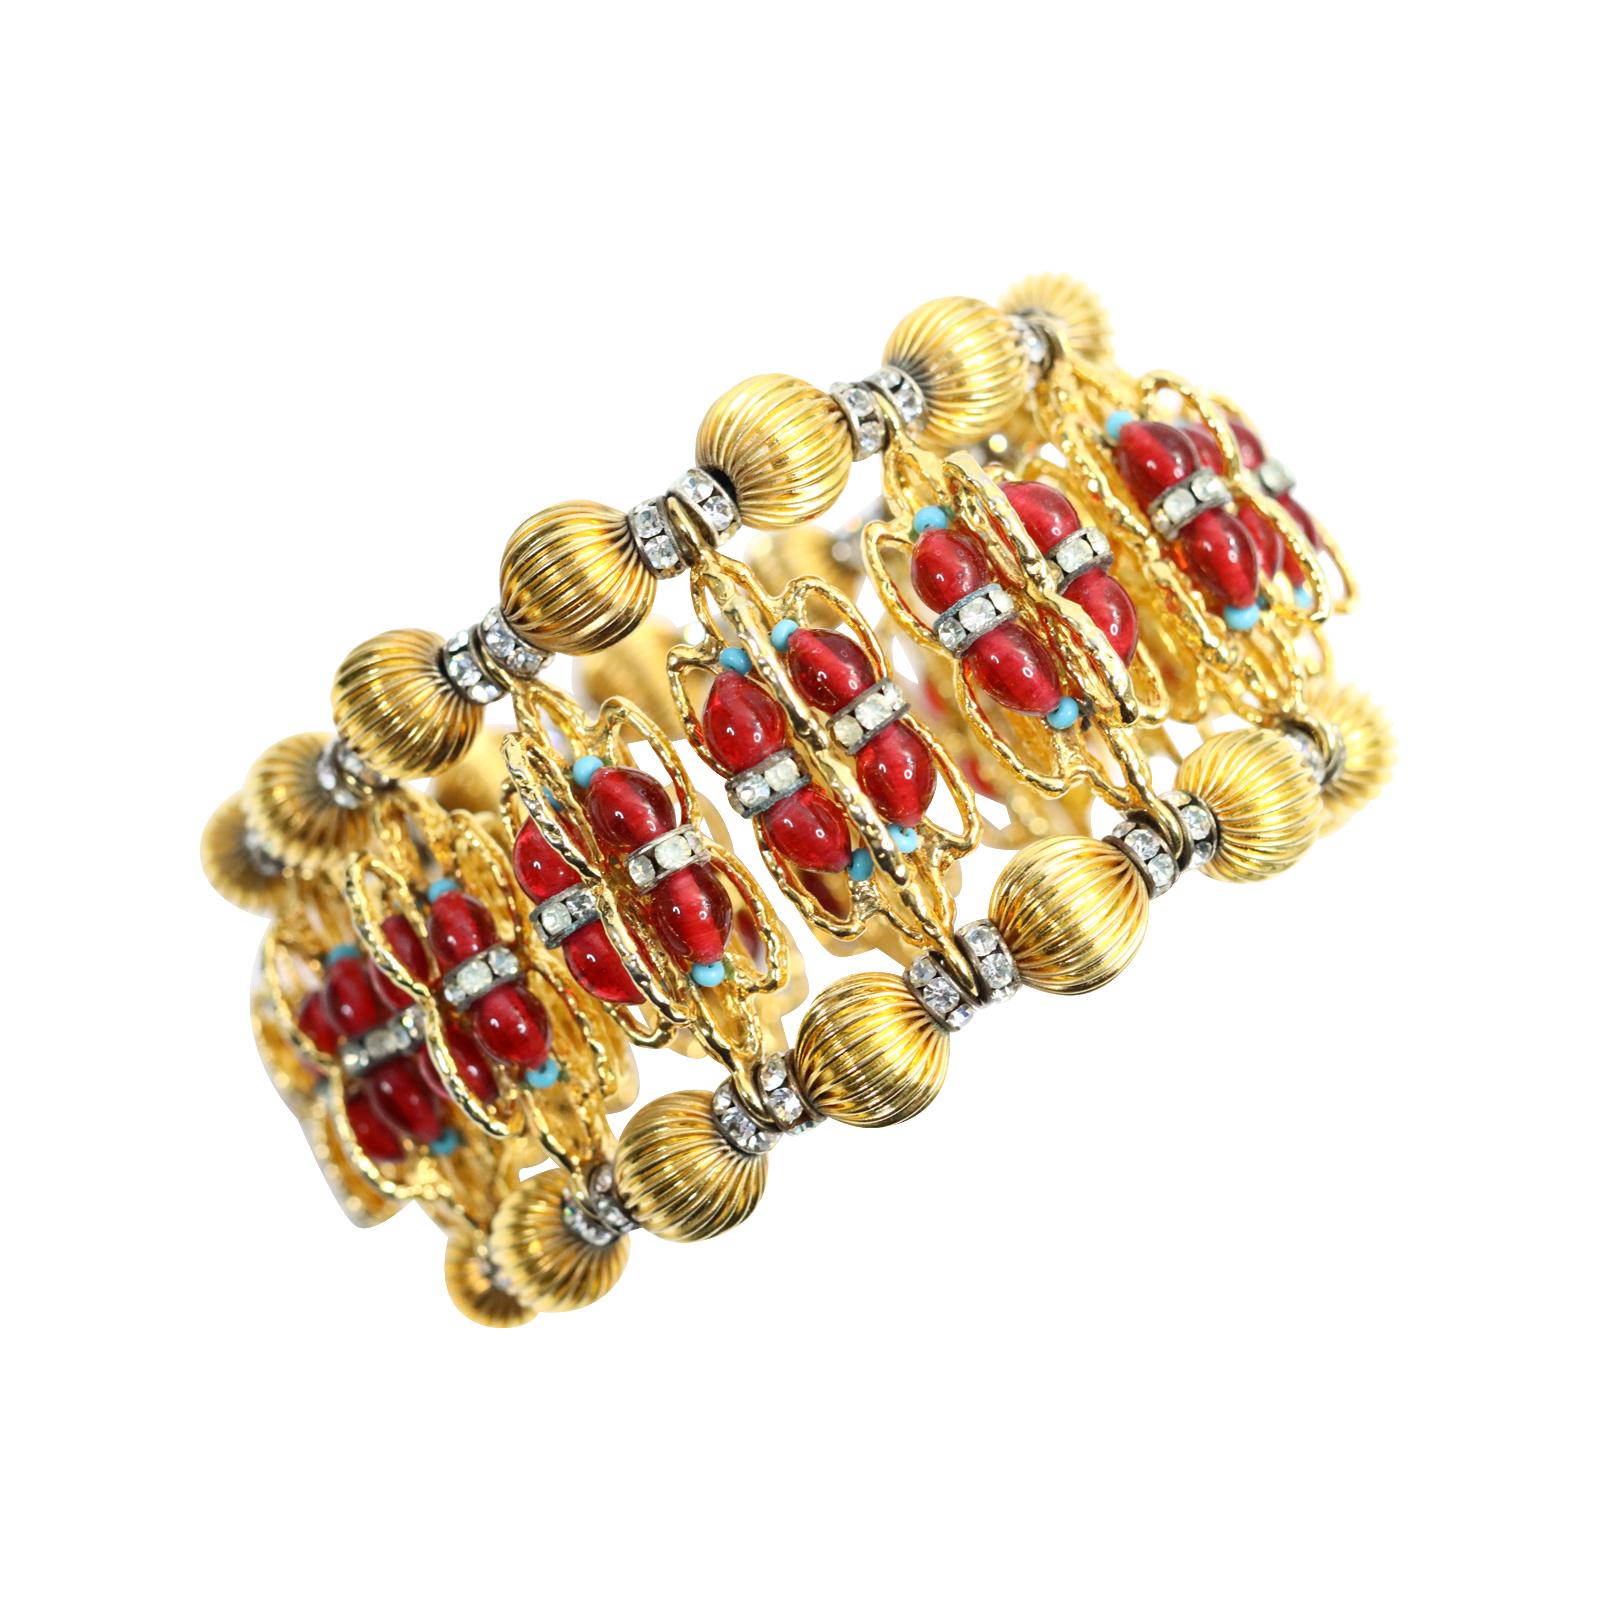 Vintage Delillo Bracelet with Red Cabochons Crystals Faux Turquoise circa 1970s For Sale 3